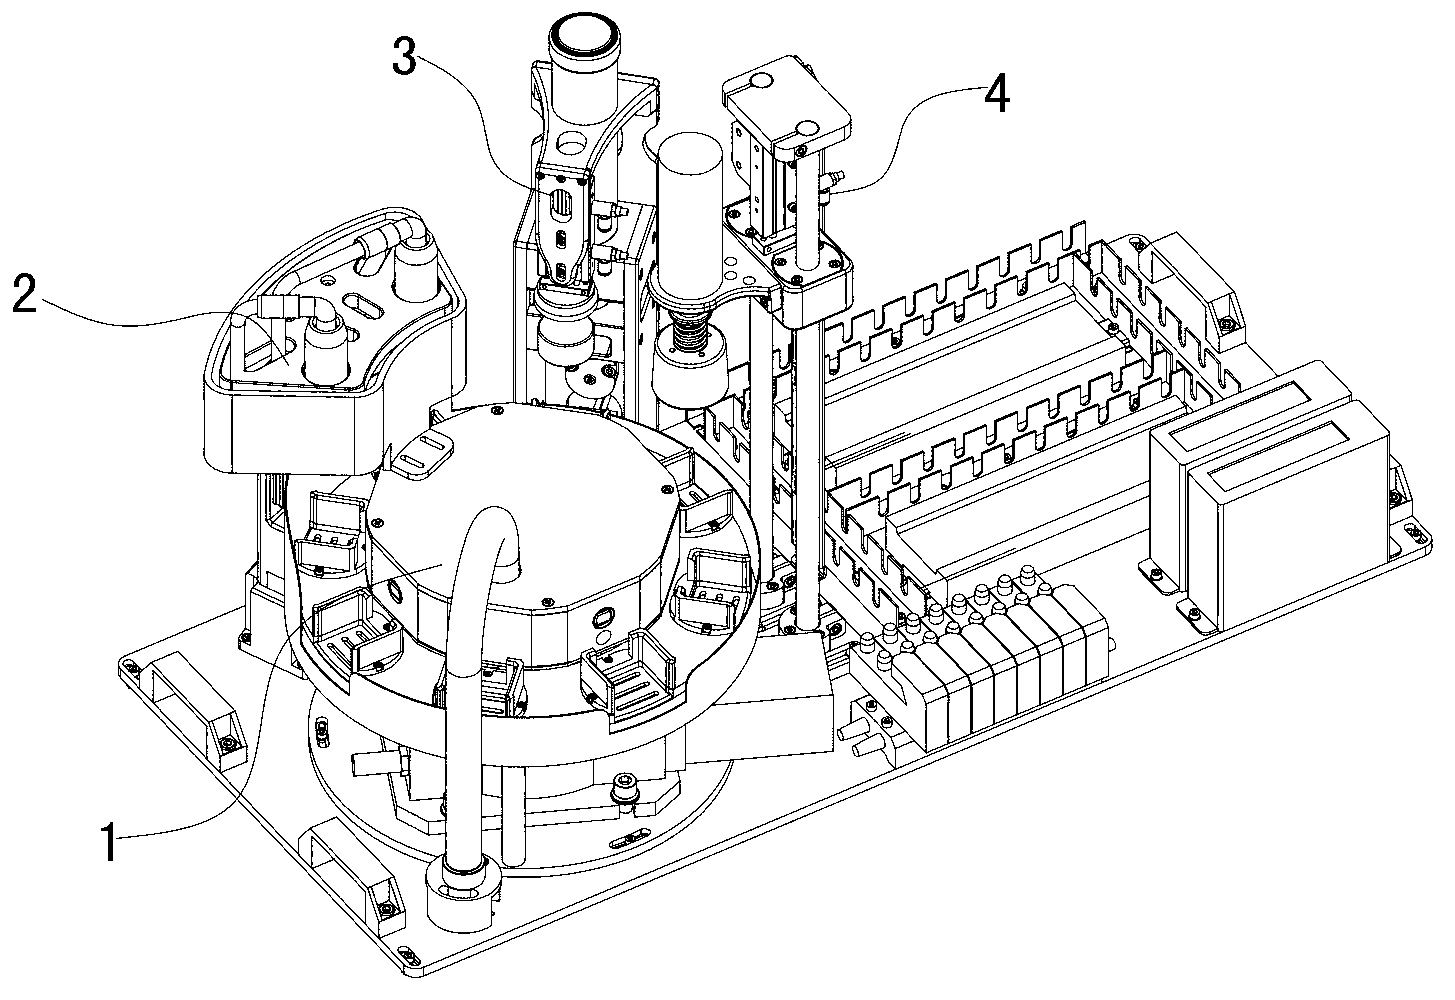 Filling capping device